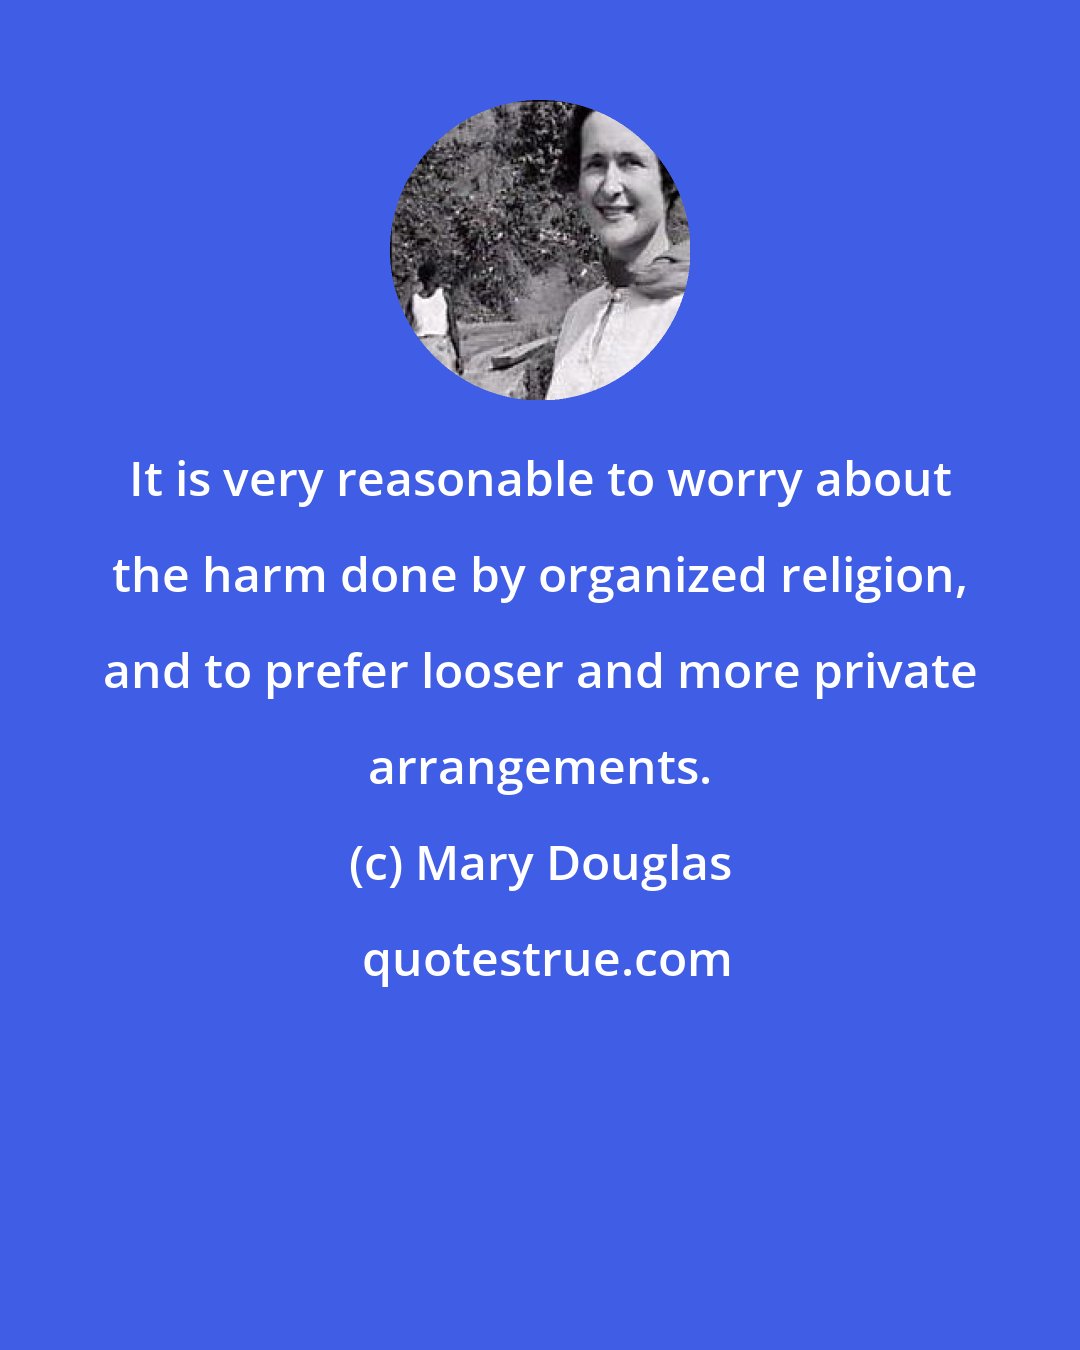 Mary Douglas: It is very reasonable to worry about the harm done by organized religion, and to prefer looser and more private arrangements.